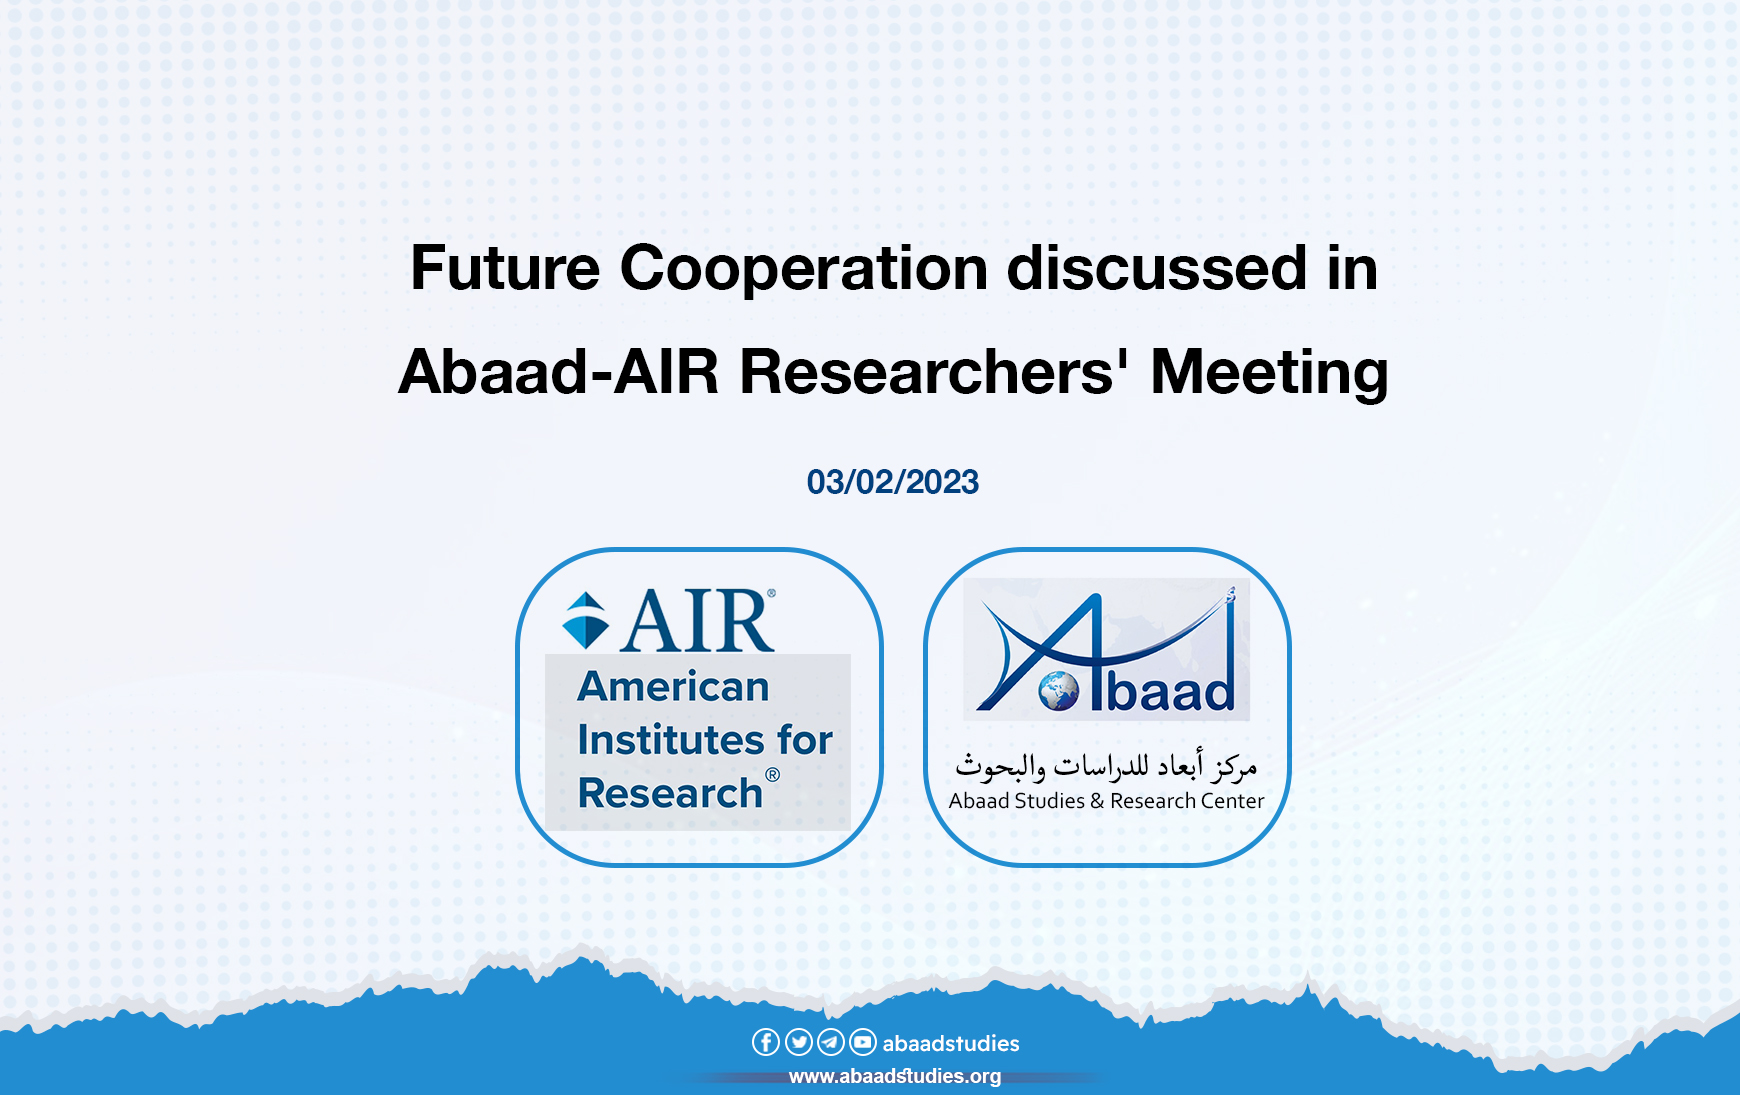  Future Cooperation discussed in Abaad-AIR Researchers' Meeting